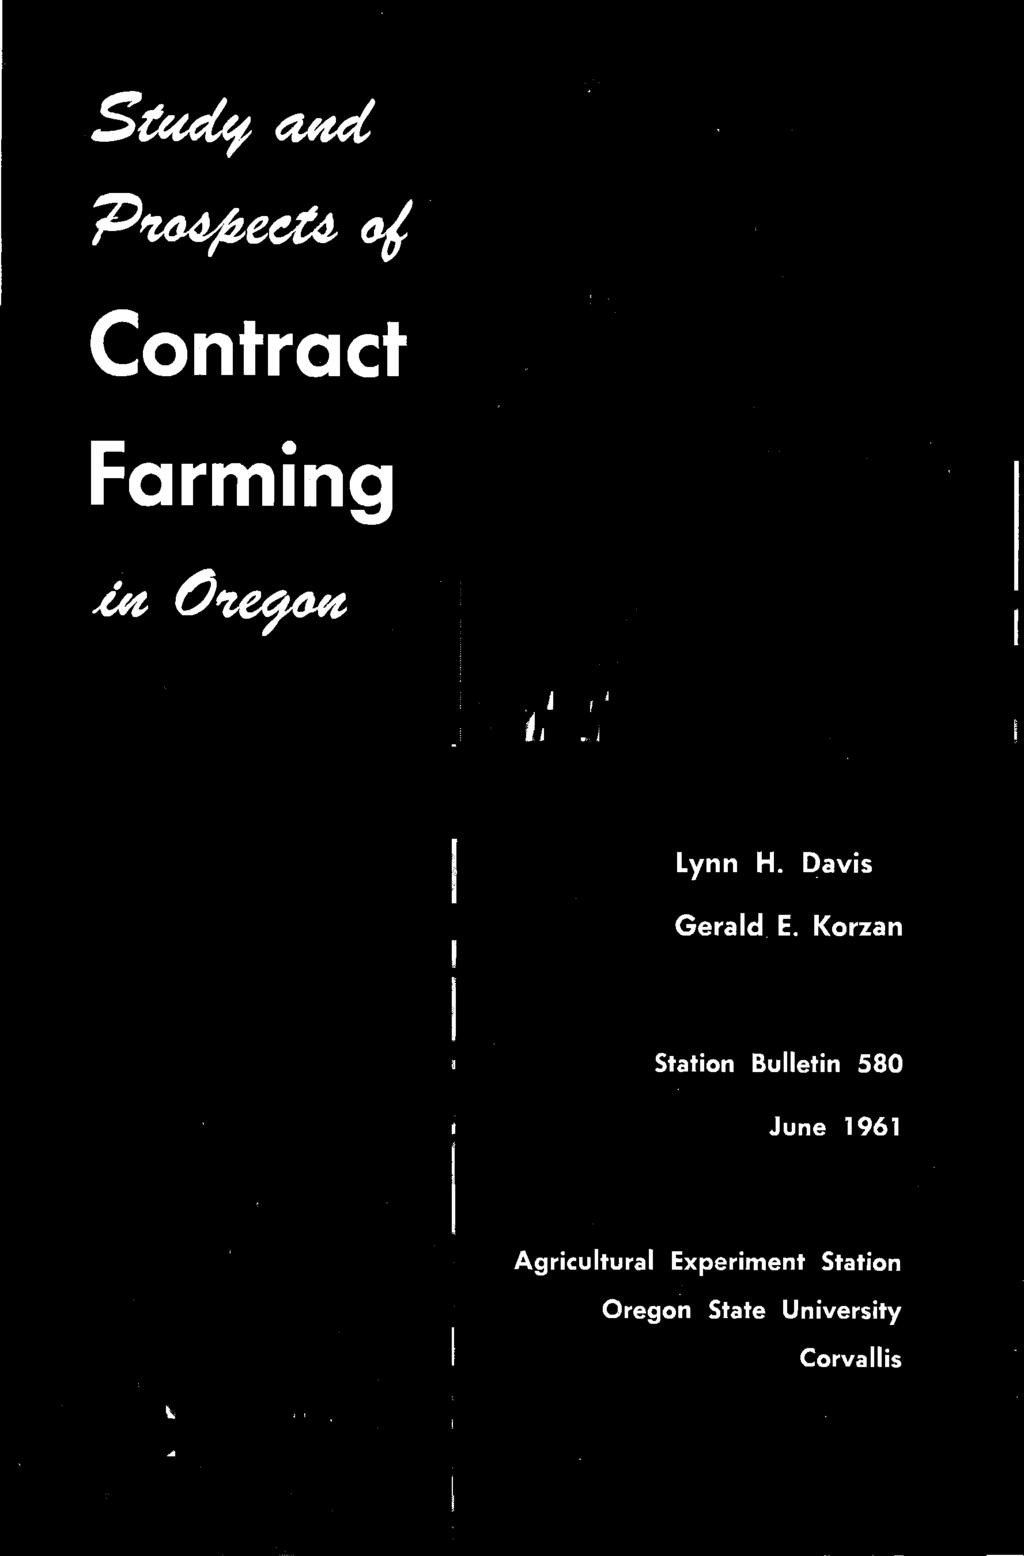 1961 Agricultural